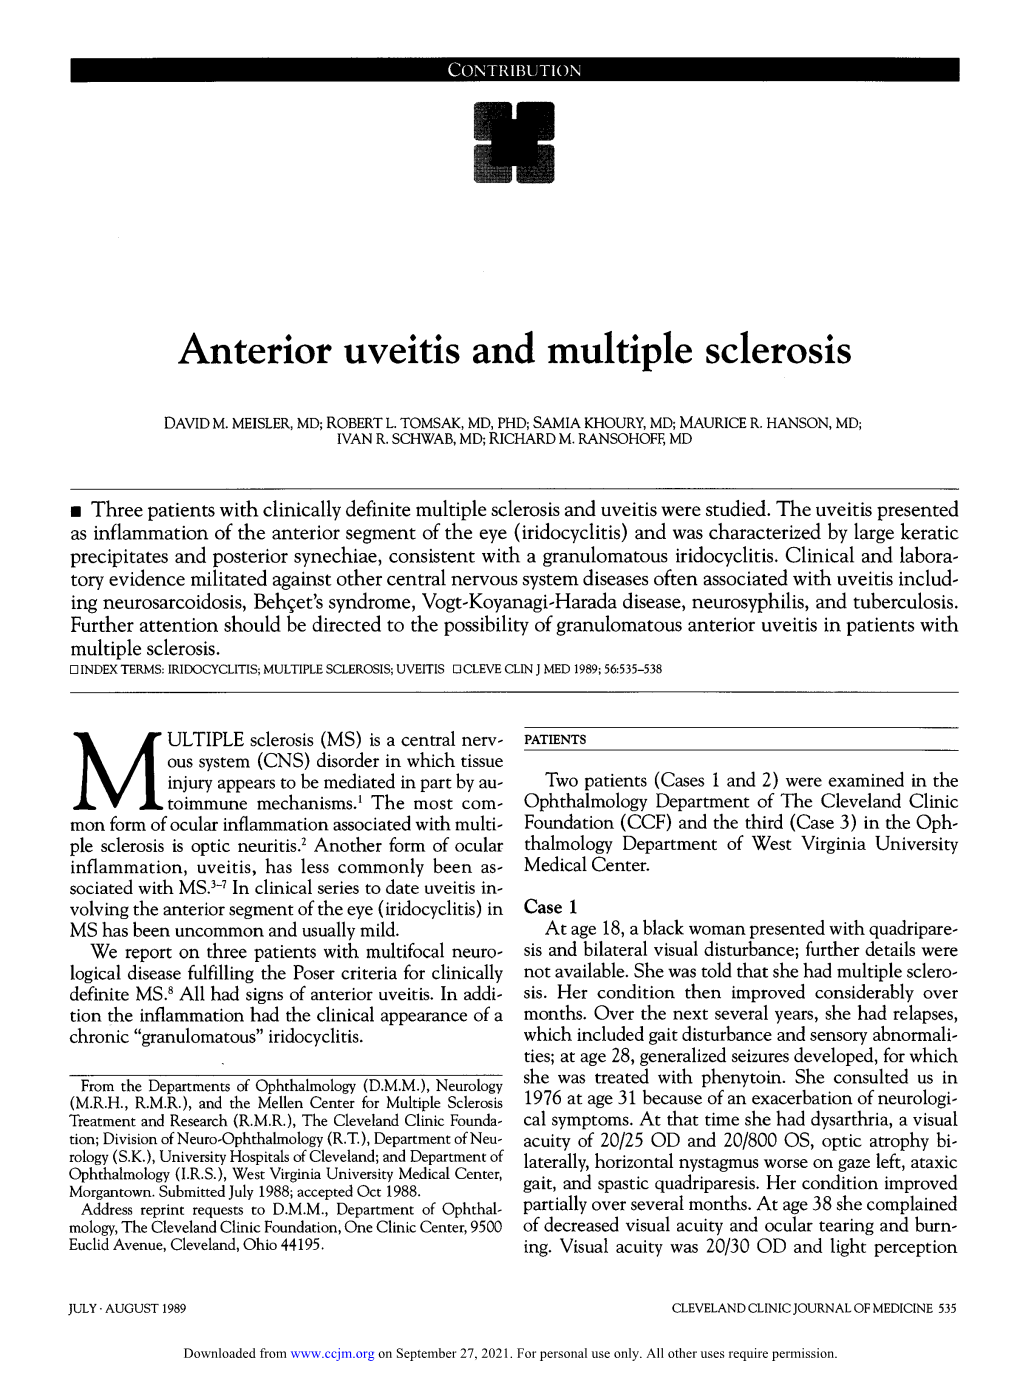 Anterior Uveitis and Multiple Sclerosis